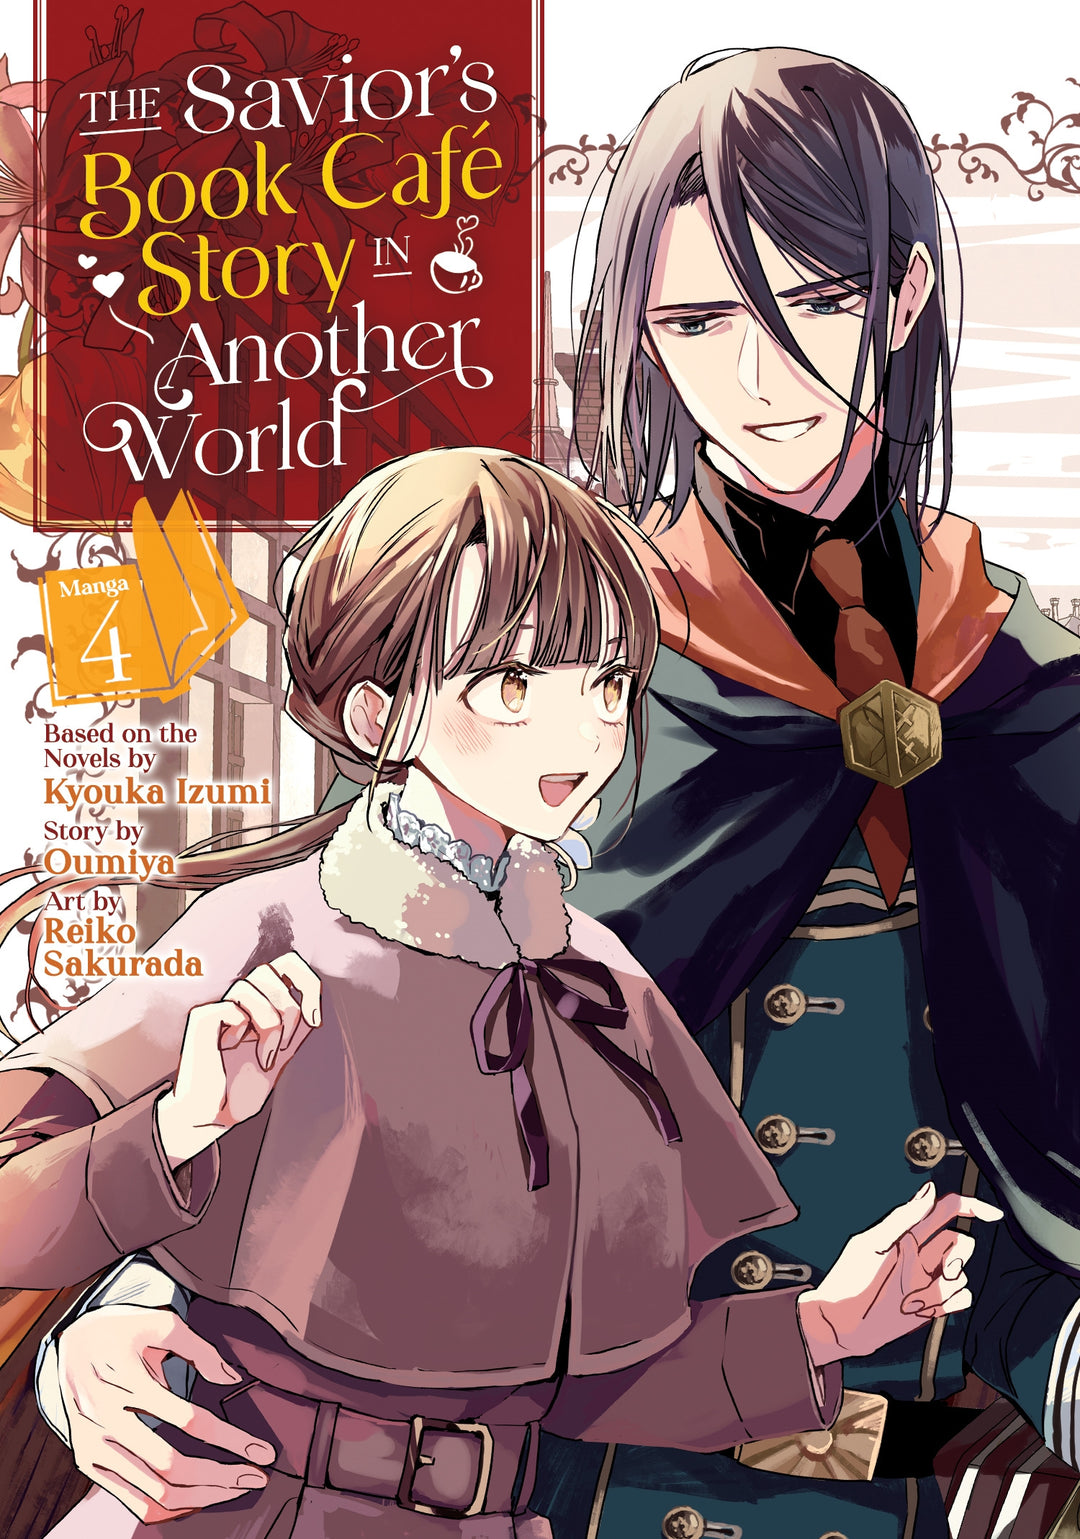 The Savior's Book Cafe Story In Another World (Manga), Vol. 04